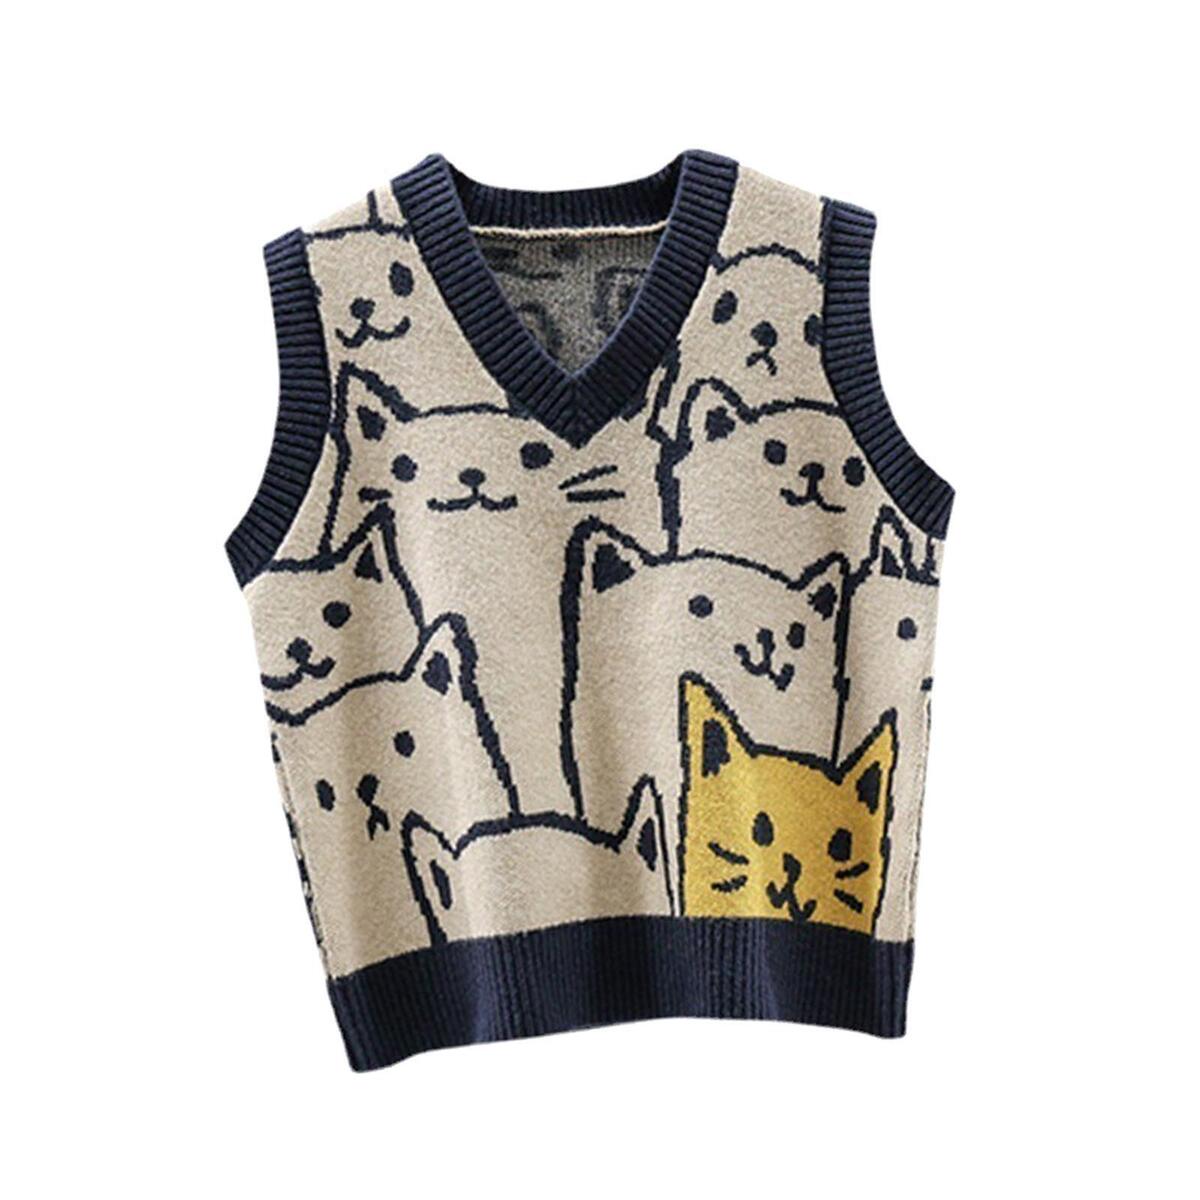 Women Knitted Sweater Vest Cute Cartoon Animal Patterns Vintage Breathable